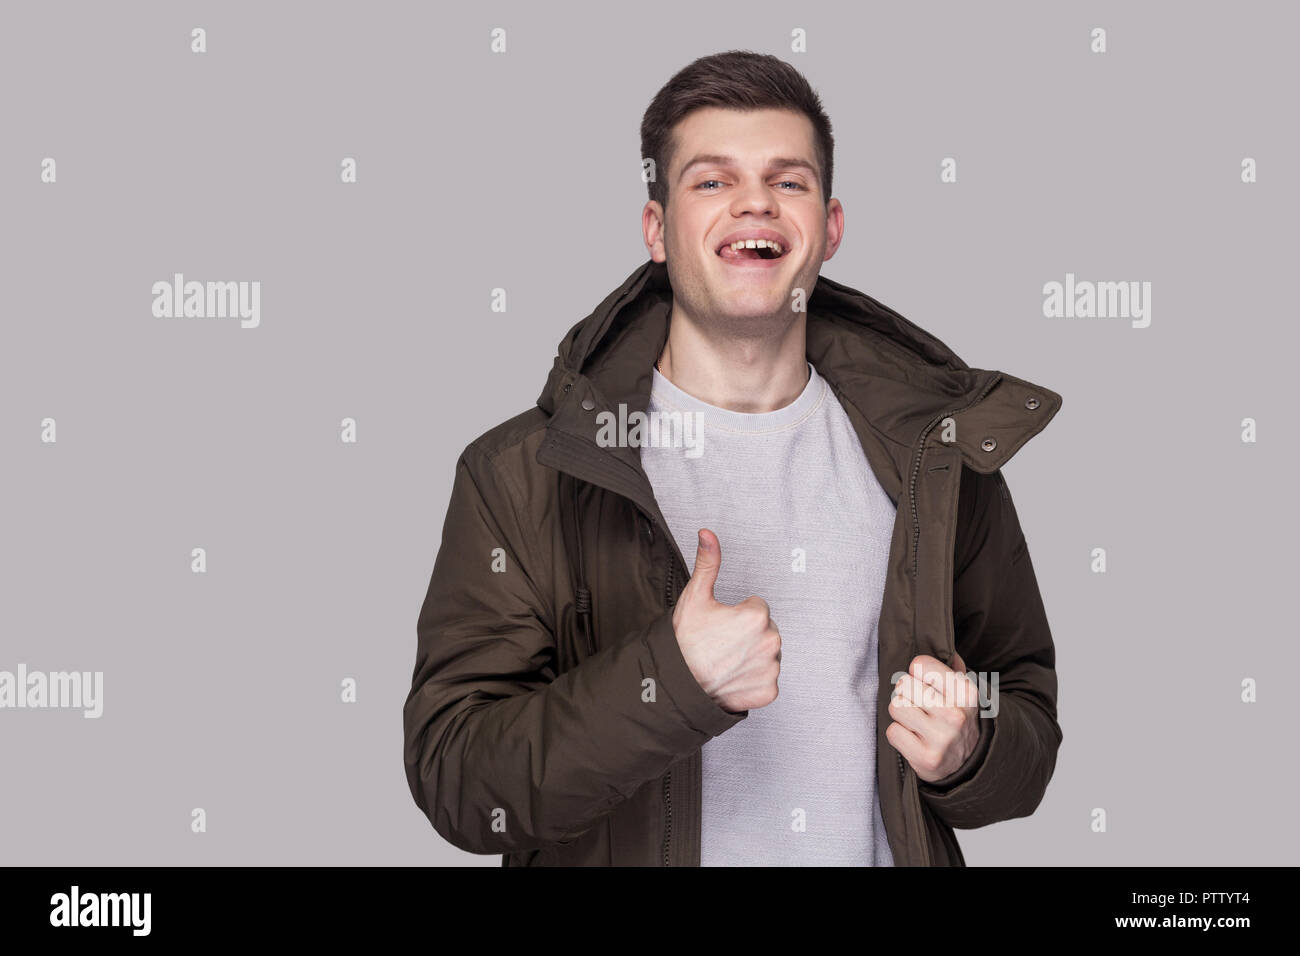 Portrait of young funny handsome man standing in light gray shirt and dark green parka looking at camera and showing thumbs up. indoor studio shot, is Stock Photo